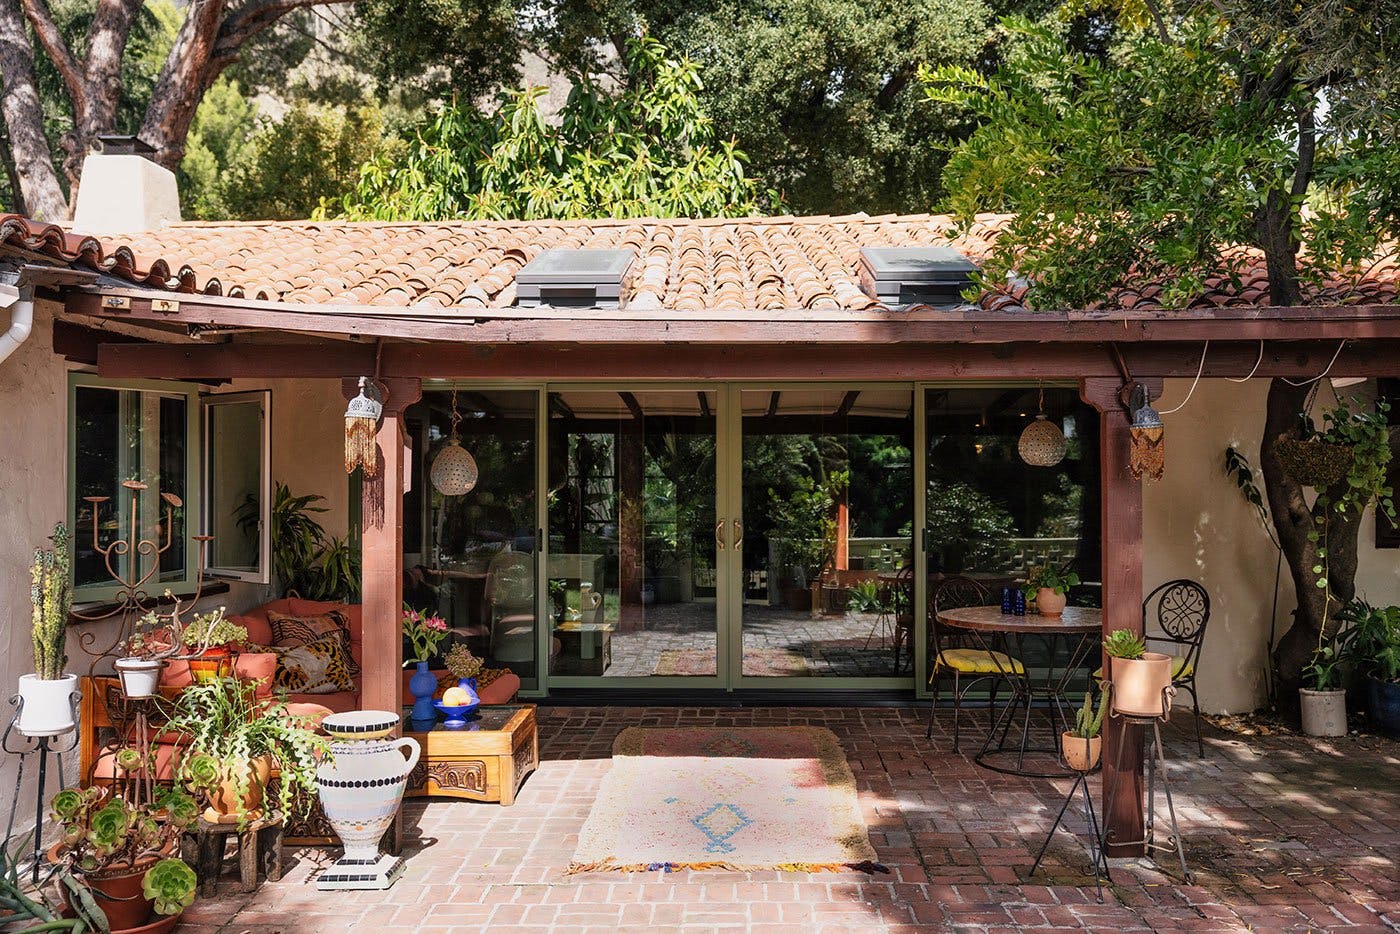 A four-panel sliding patio door connects to a brick-paved courtyard that’s partially shaded by a roof overhang.